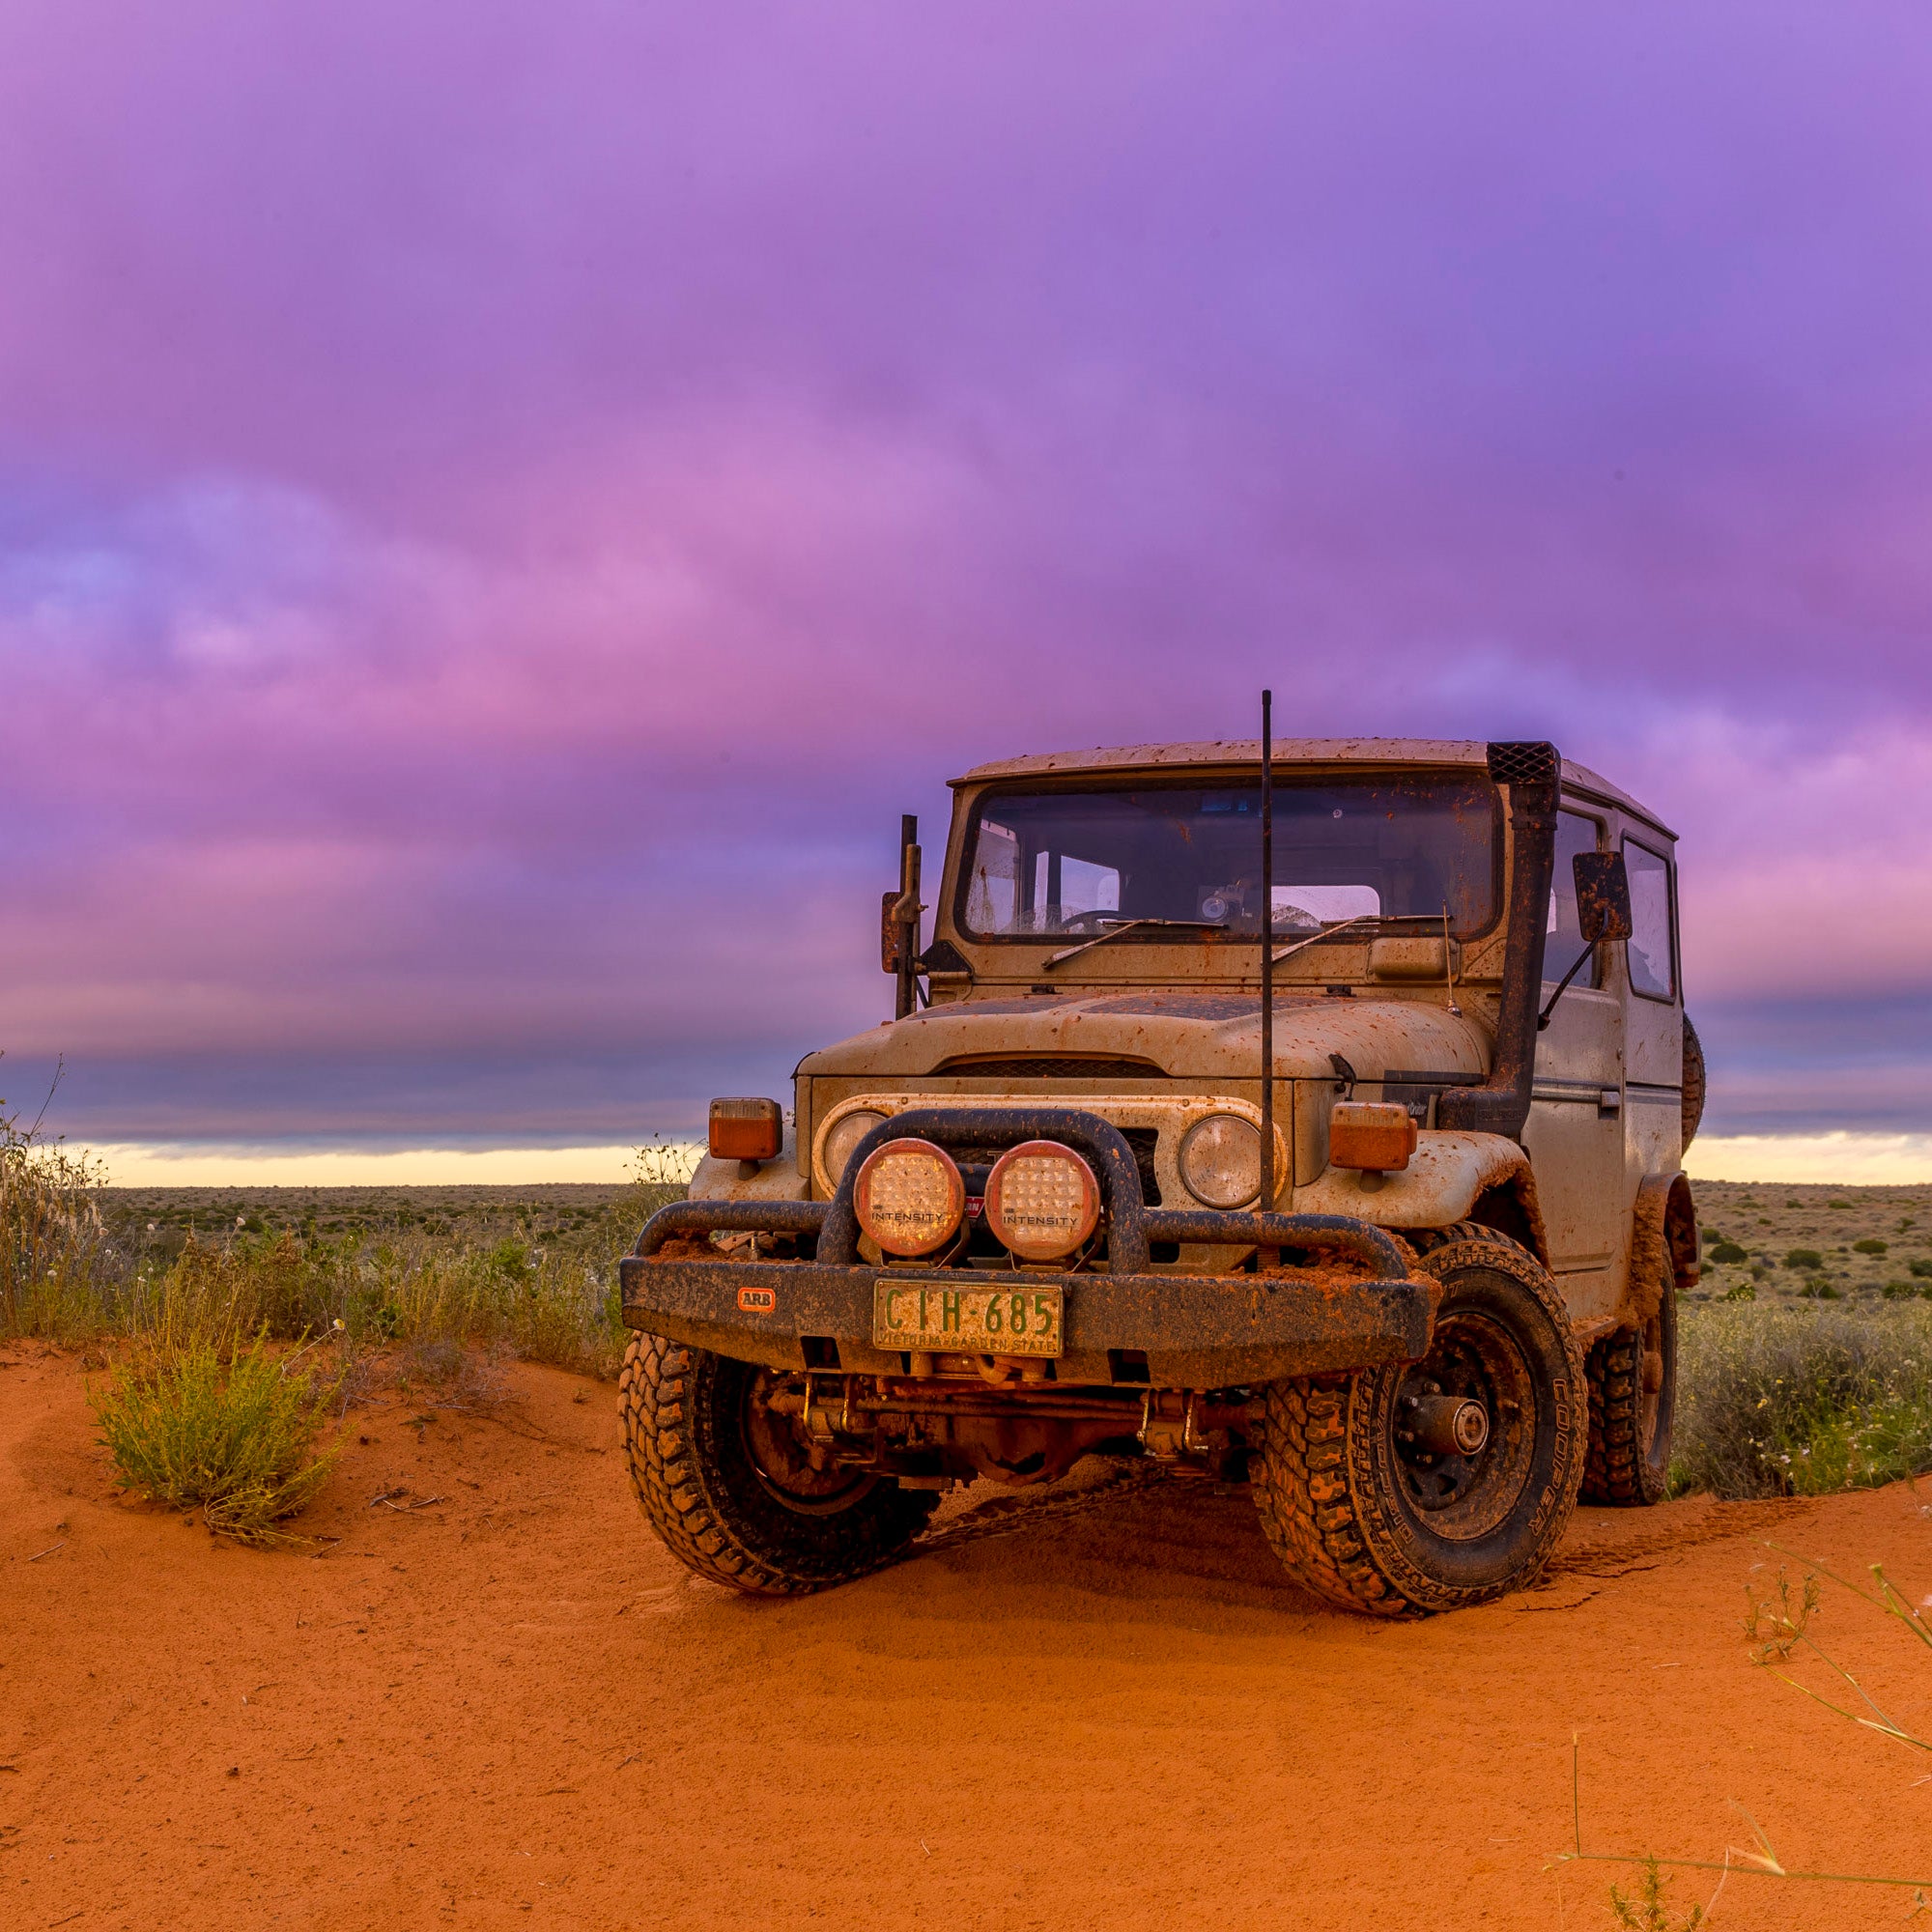 New vs. Old: Which 4x4s Better Off-Road? - Outside Online